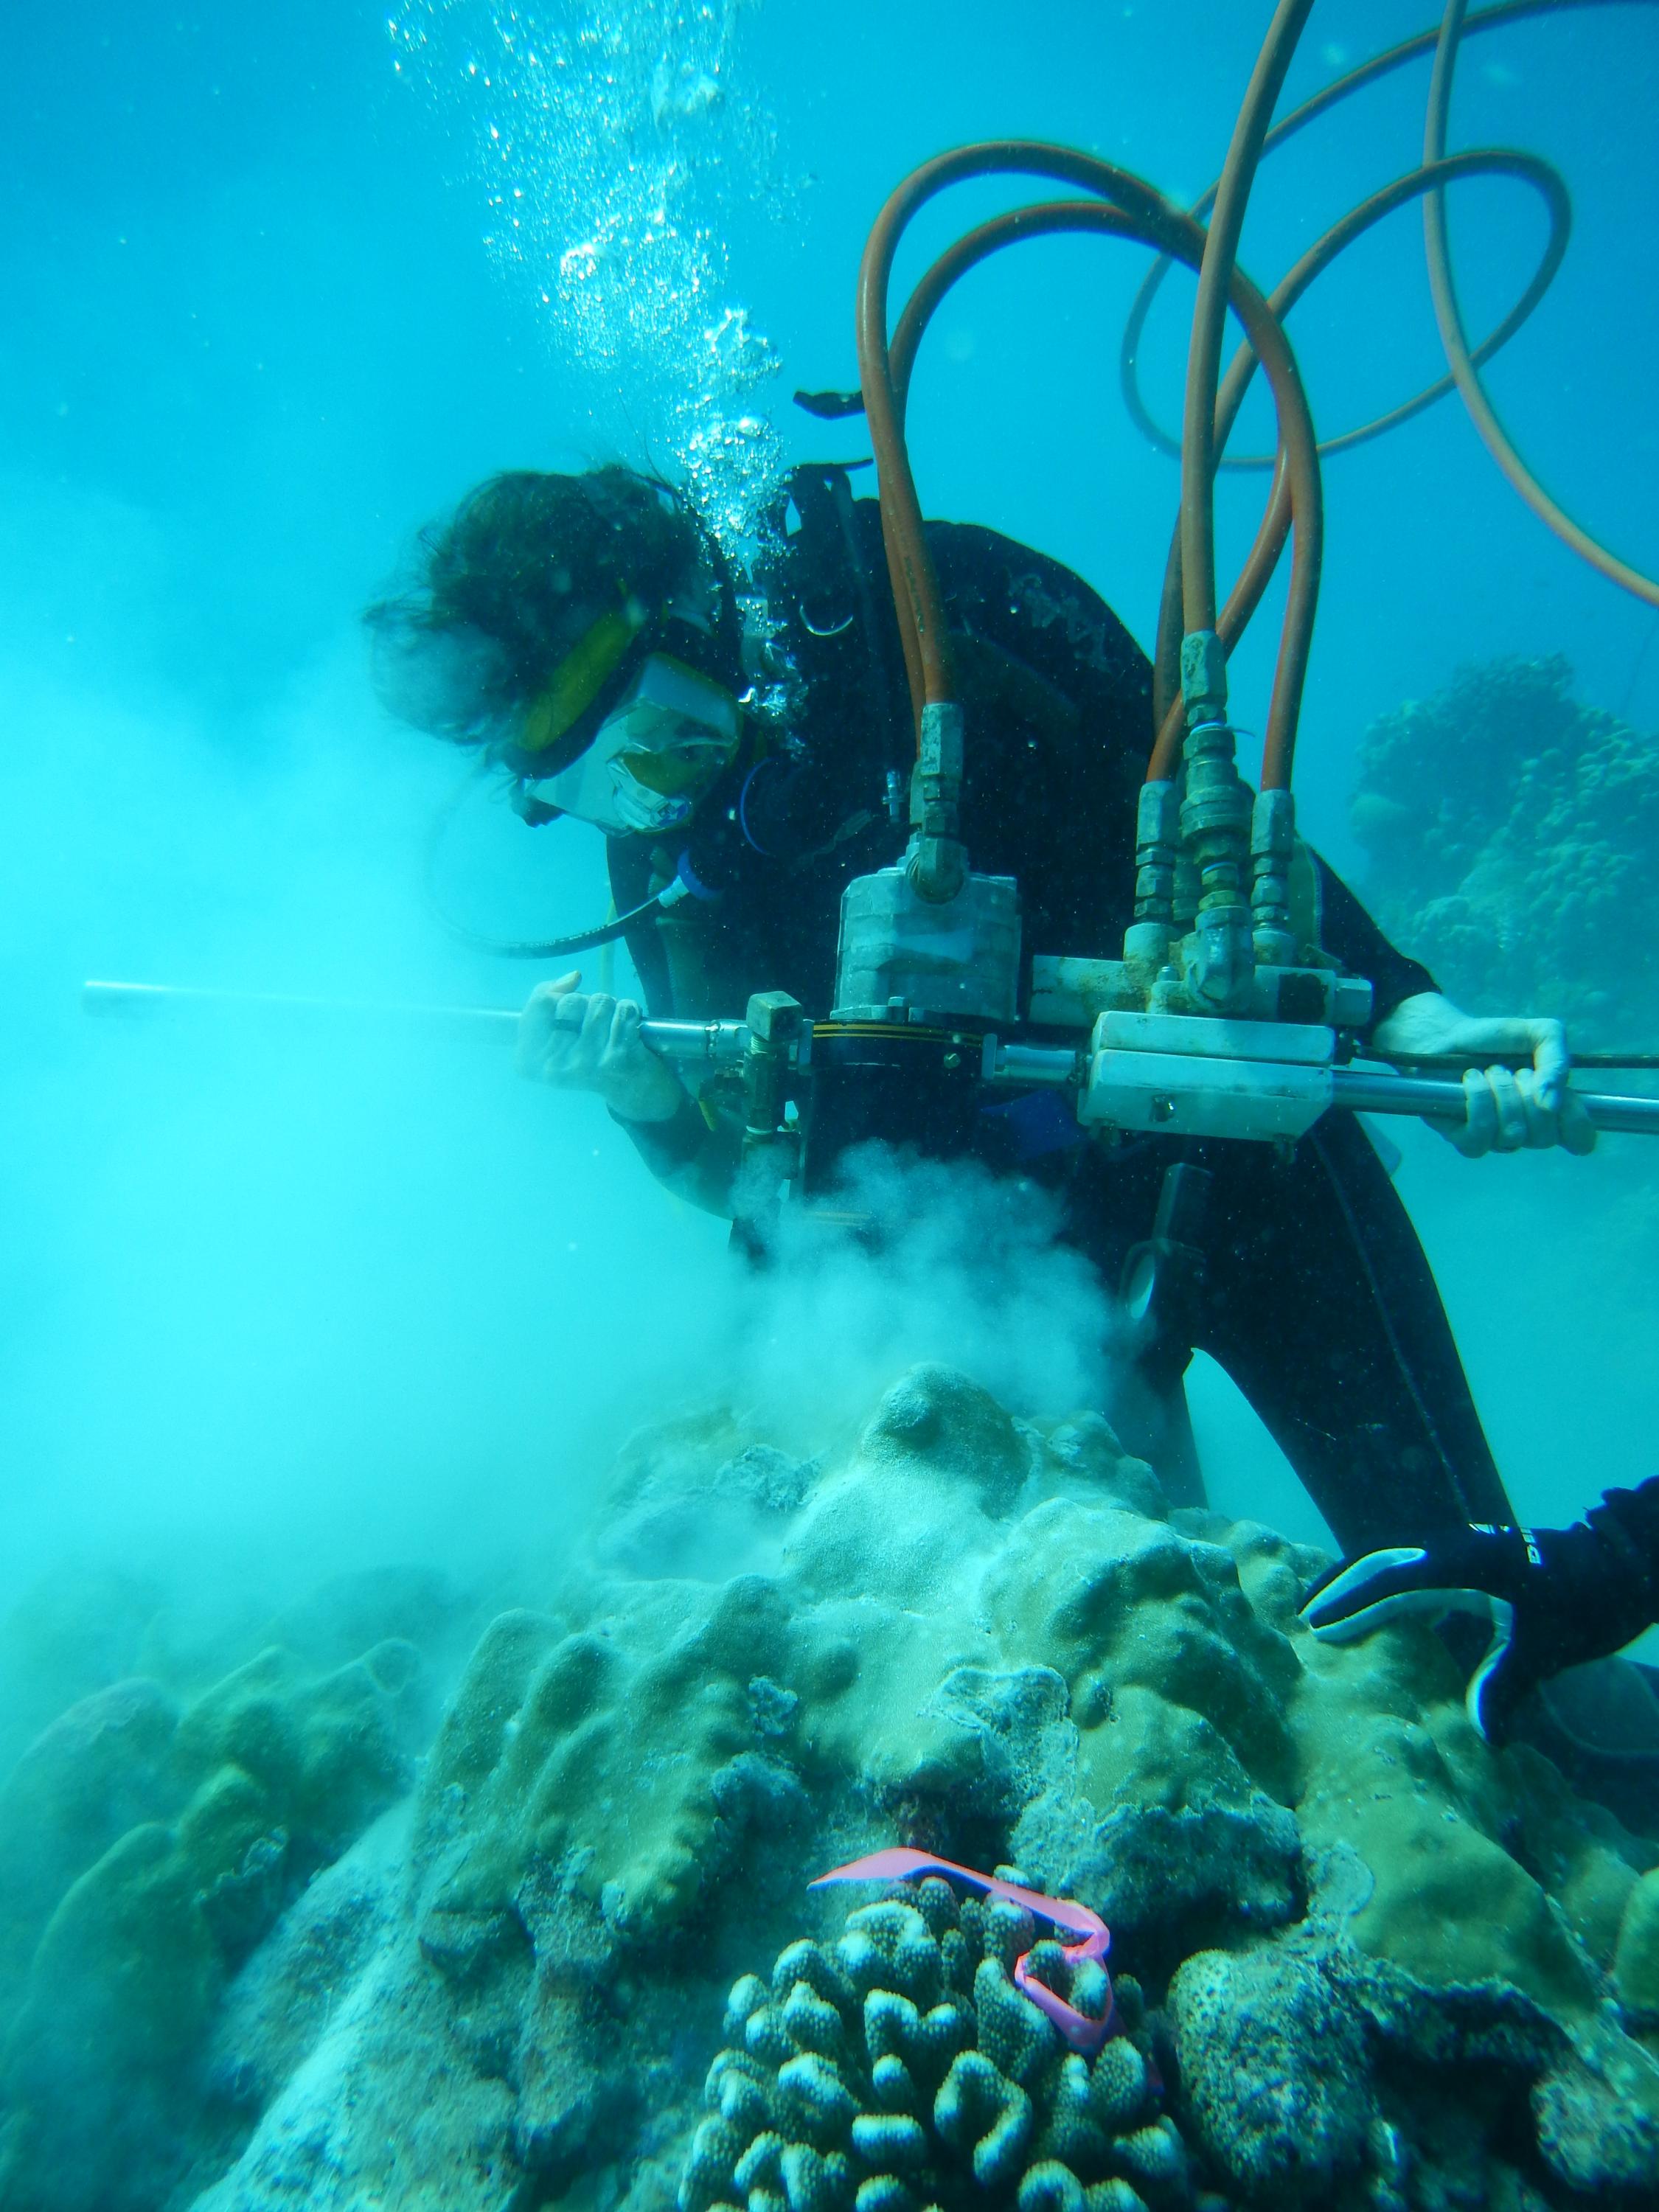 Kim Cobb drills corals underwater in the tropical Pacific